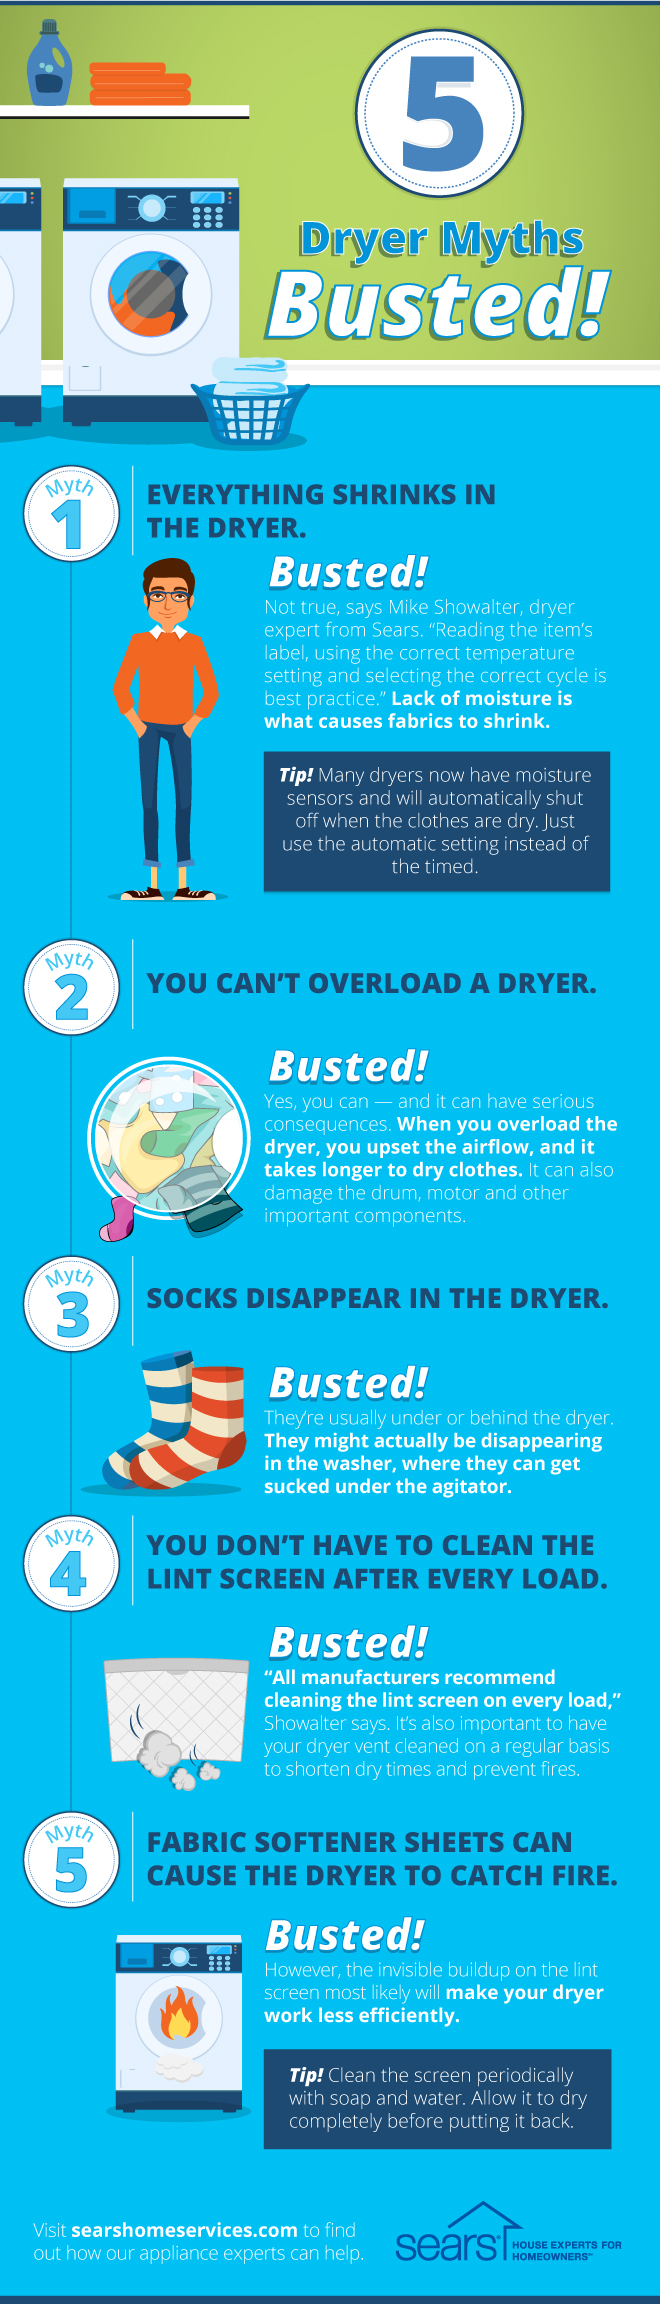 5 Laundry Myths Debunked: Dryer Edition